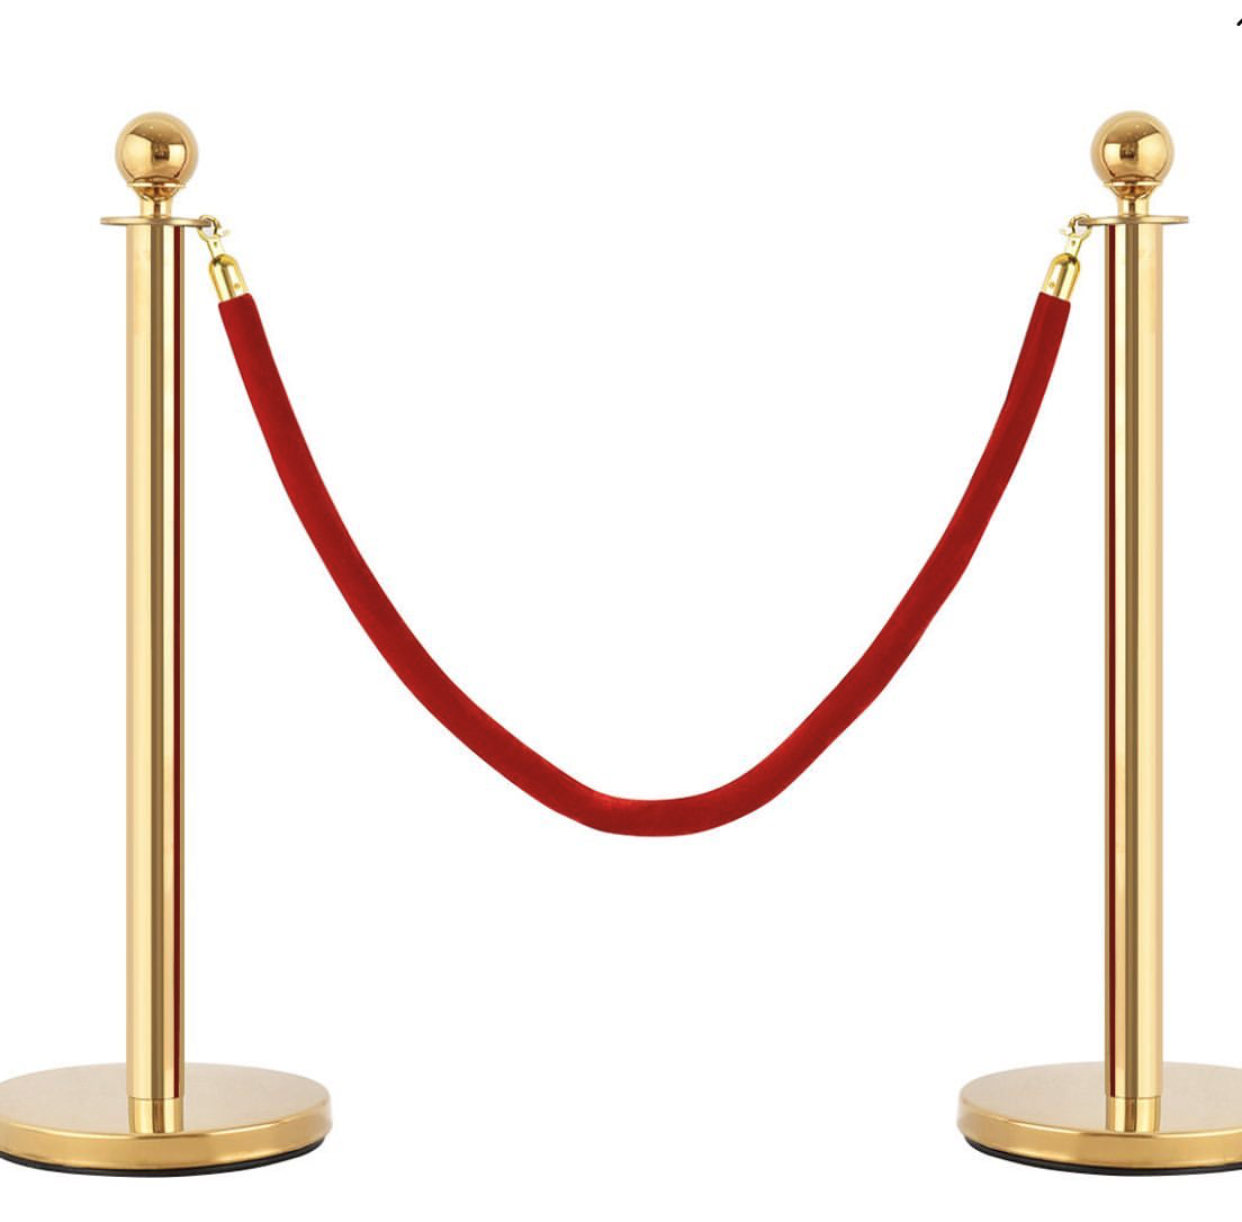 Stanchions $15